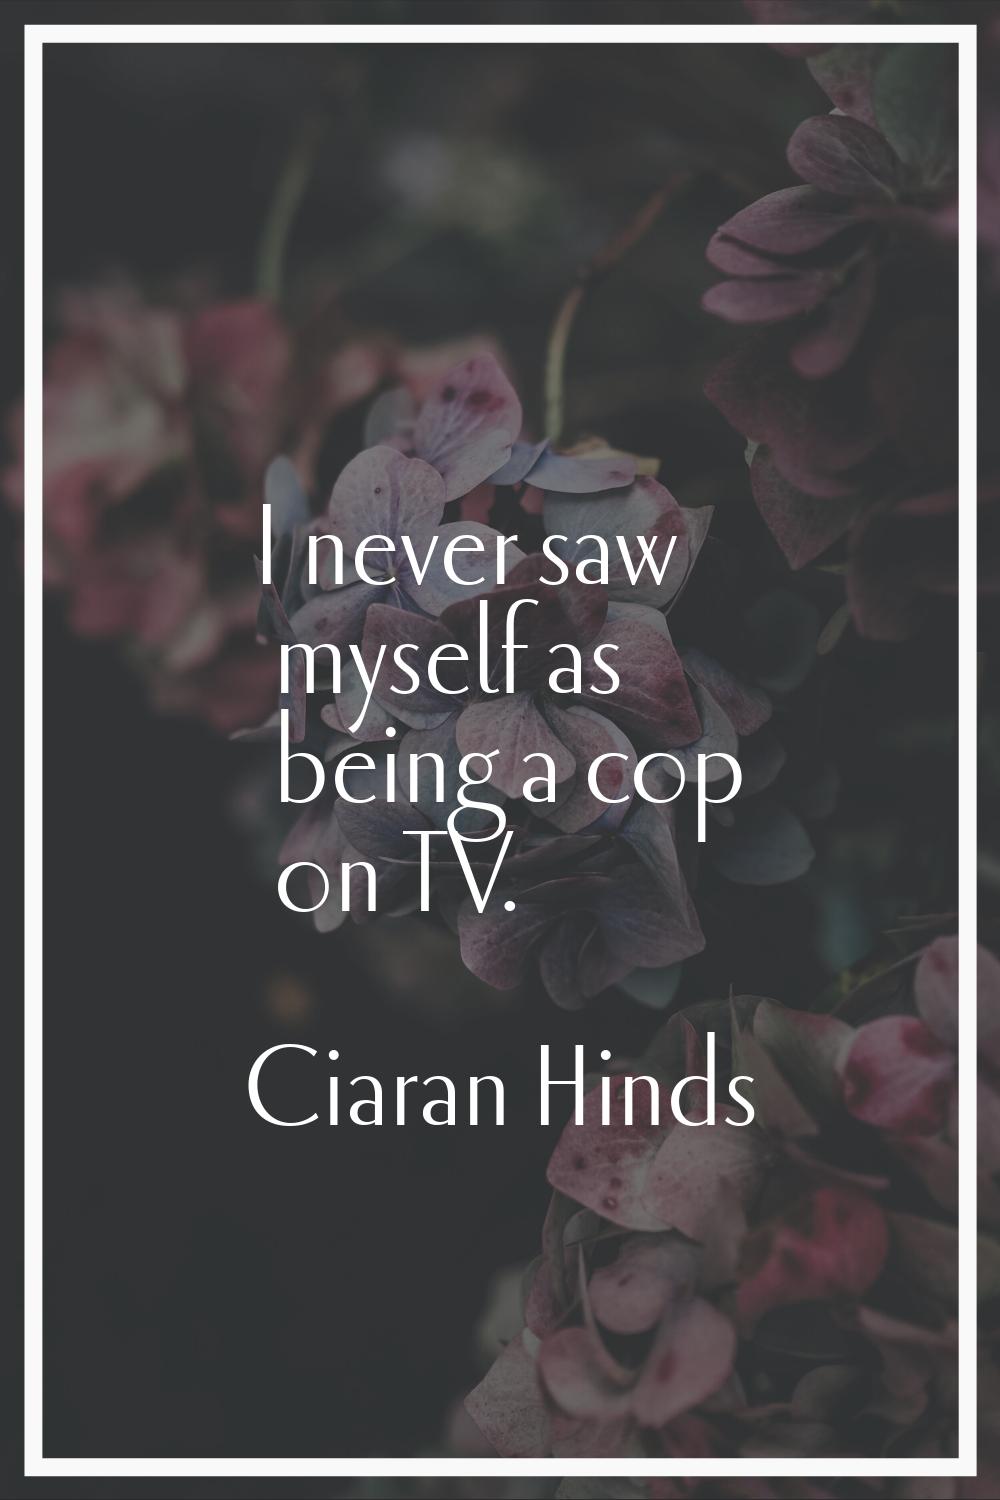 I never saw myself as being a cop on TV.